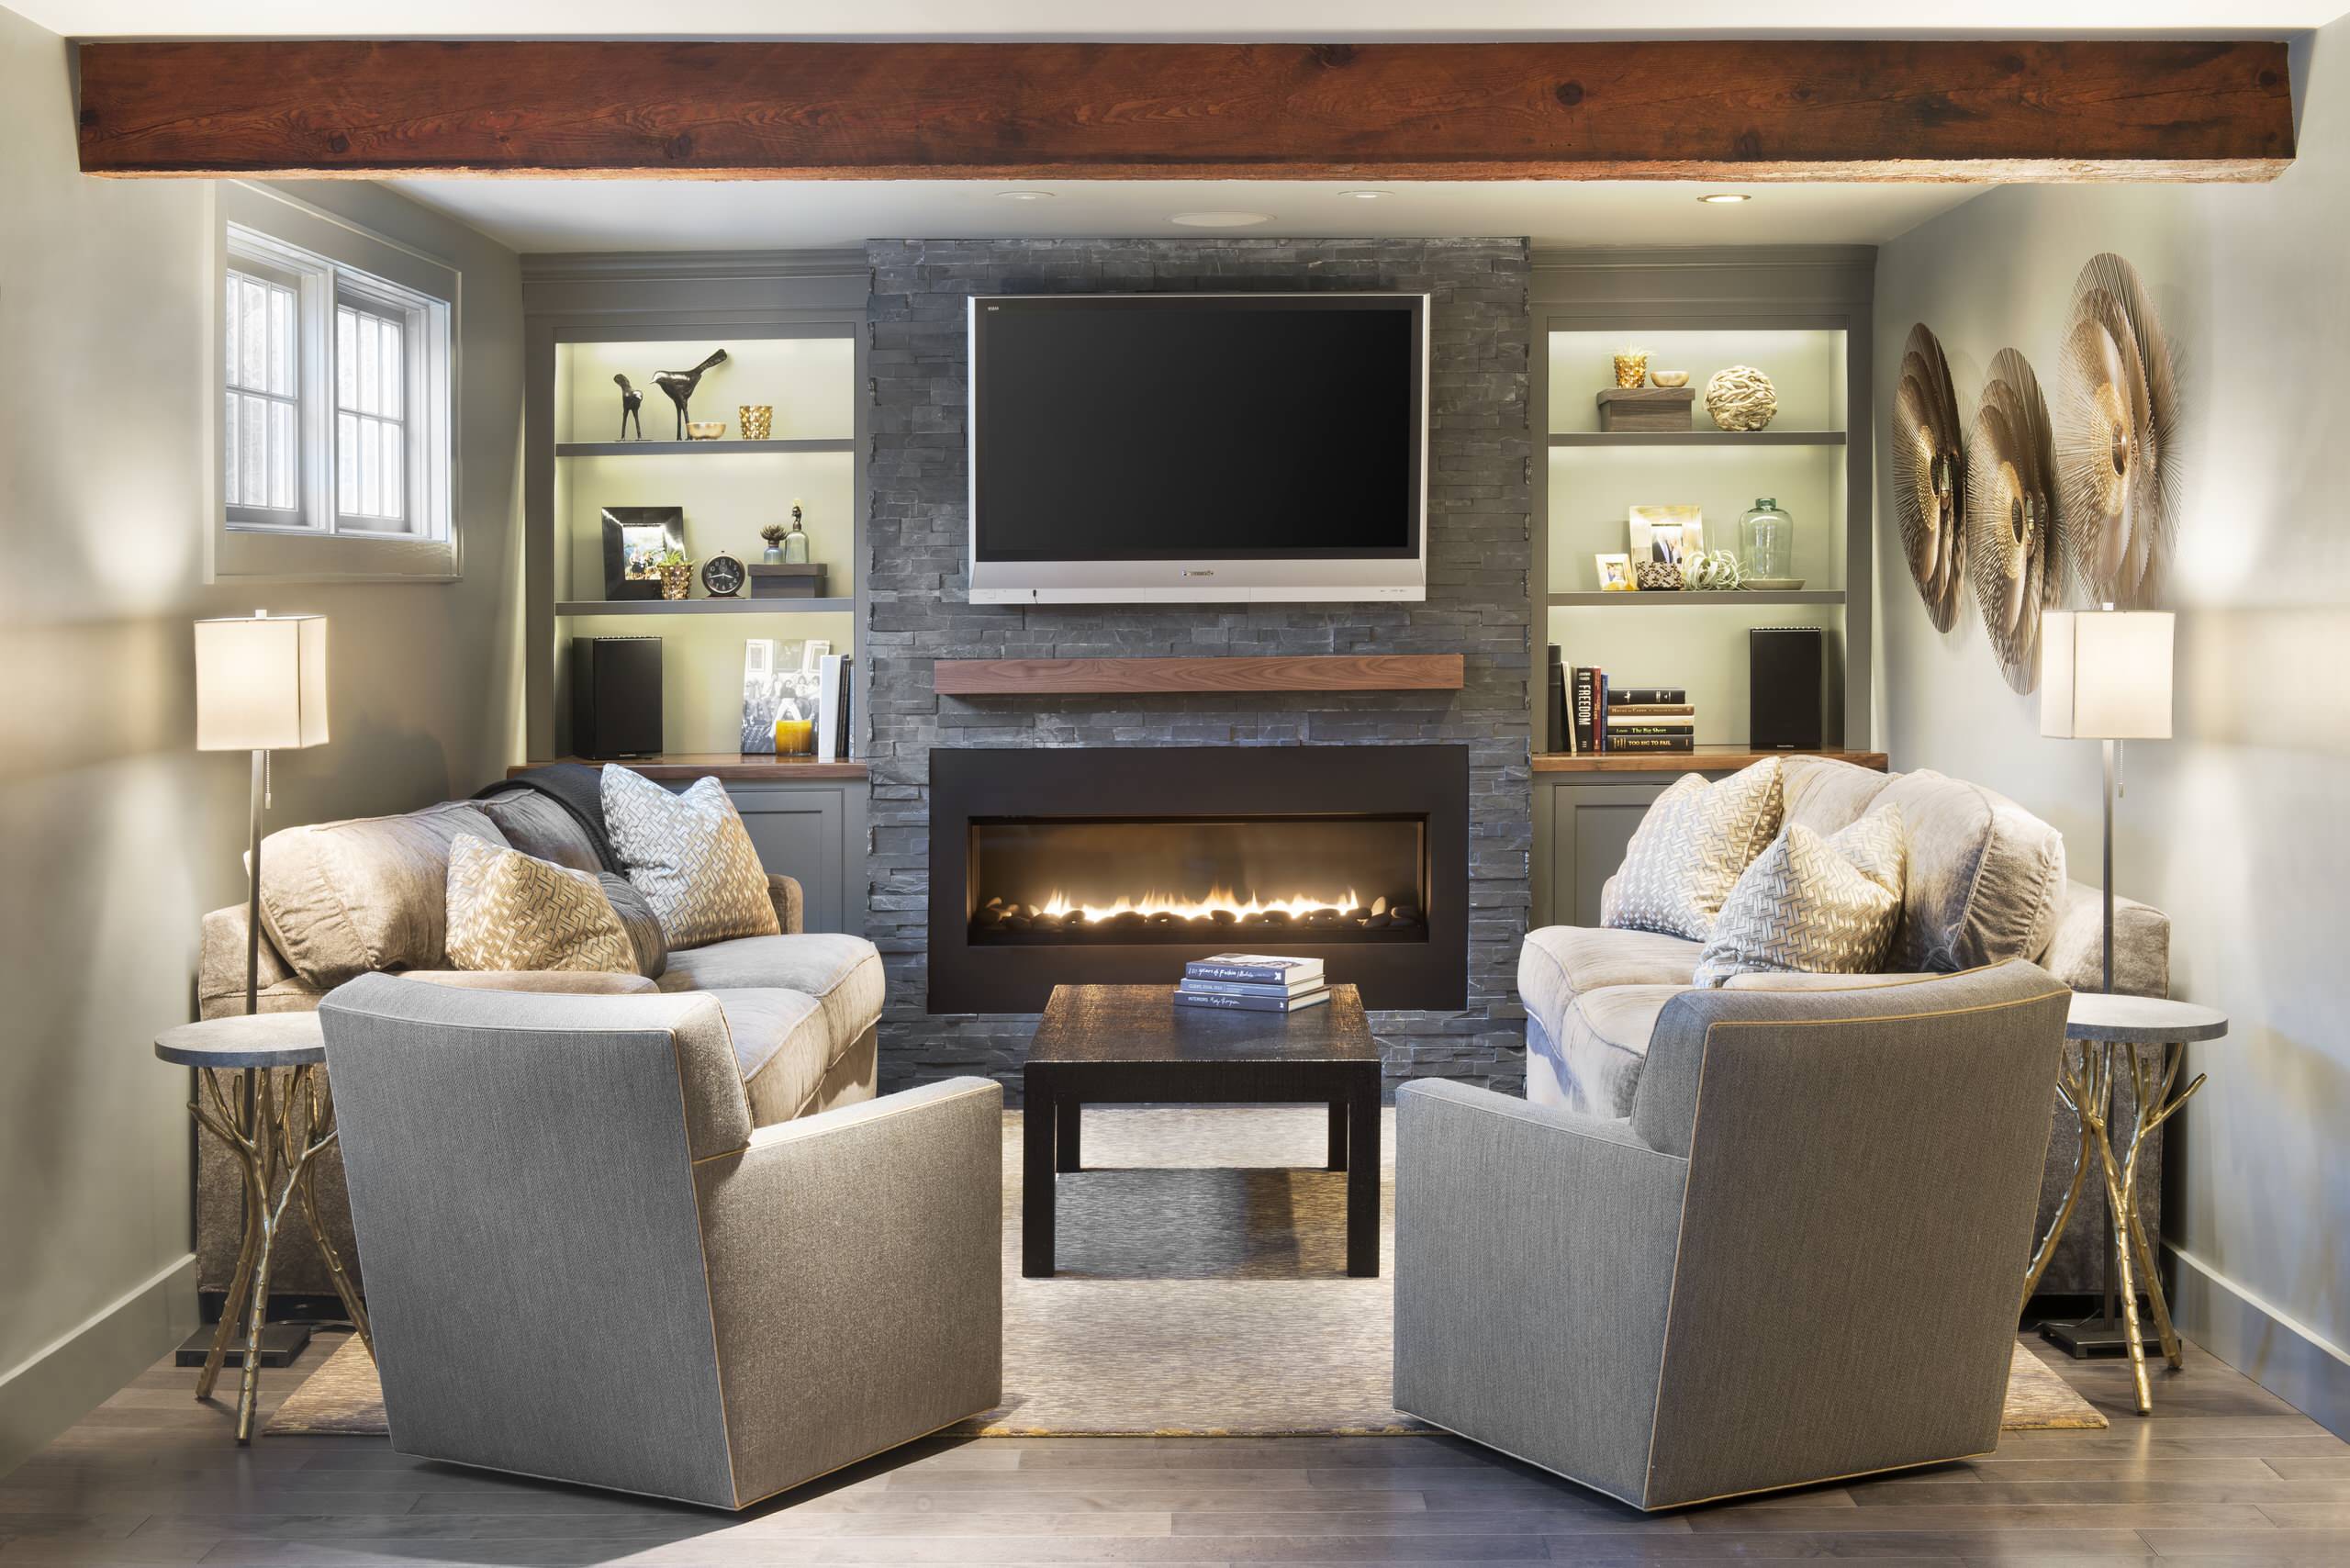 75 Beautiful Living Room With A Ribbon Fireplace Pictures Ideas April 2021 Houzz